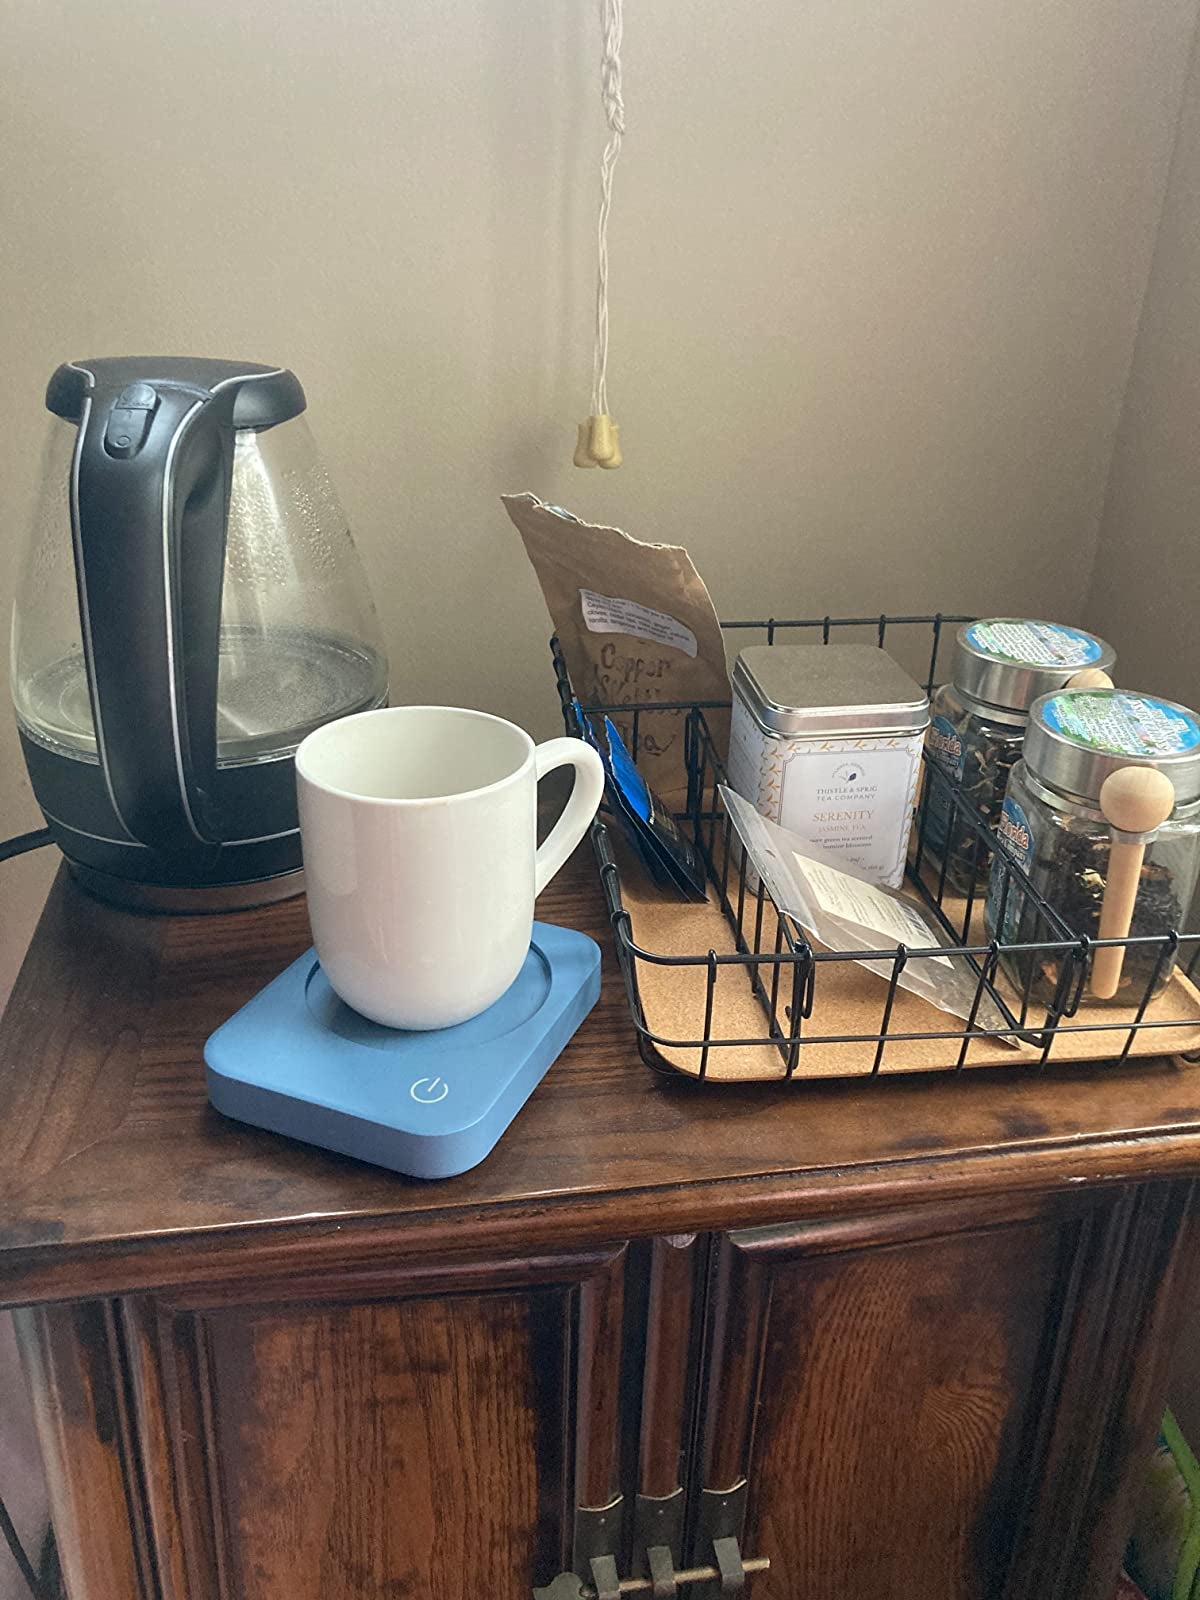 A mug sitting on the blue warmer on a reviewer's coffee table